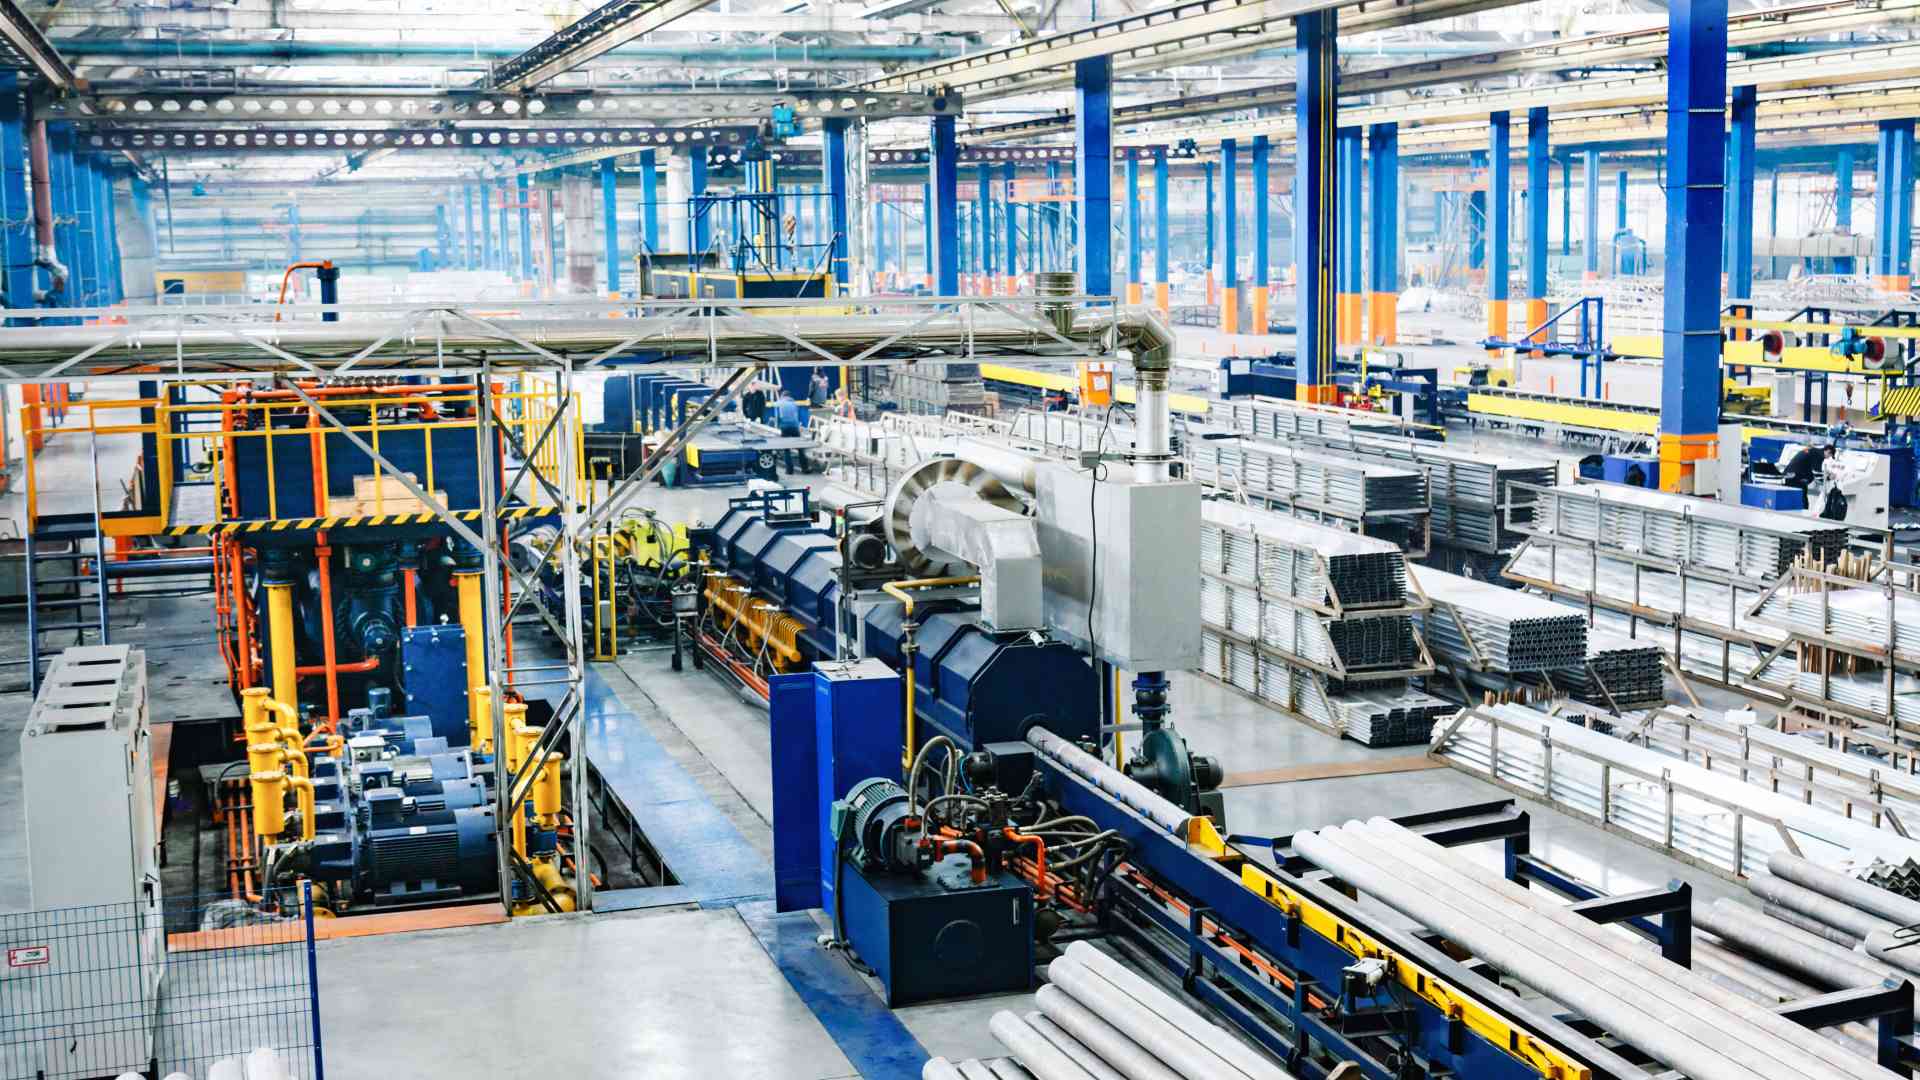 A large business warehouse is full of different machines and industrial materials, with some orange and blue poles.